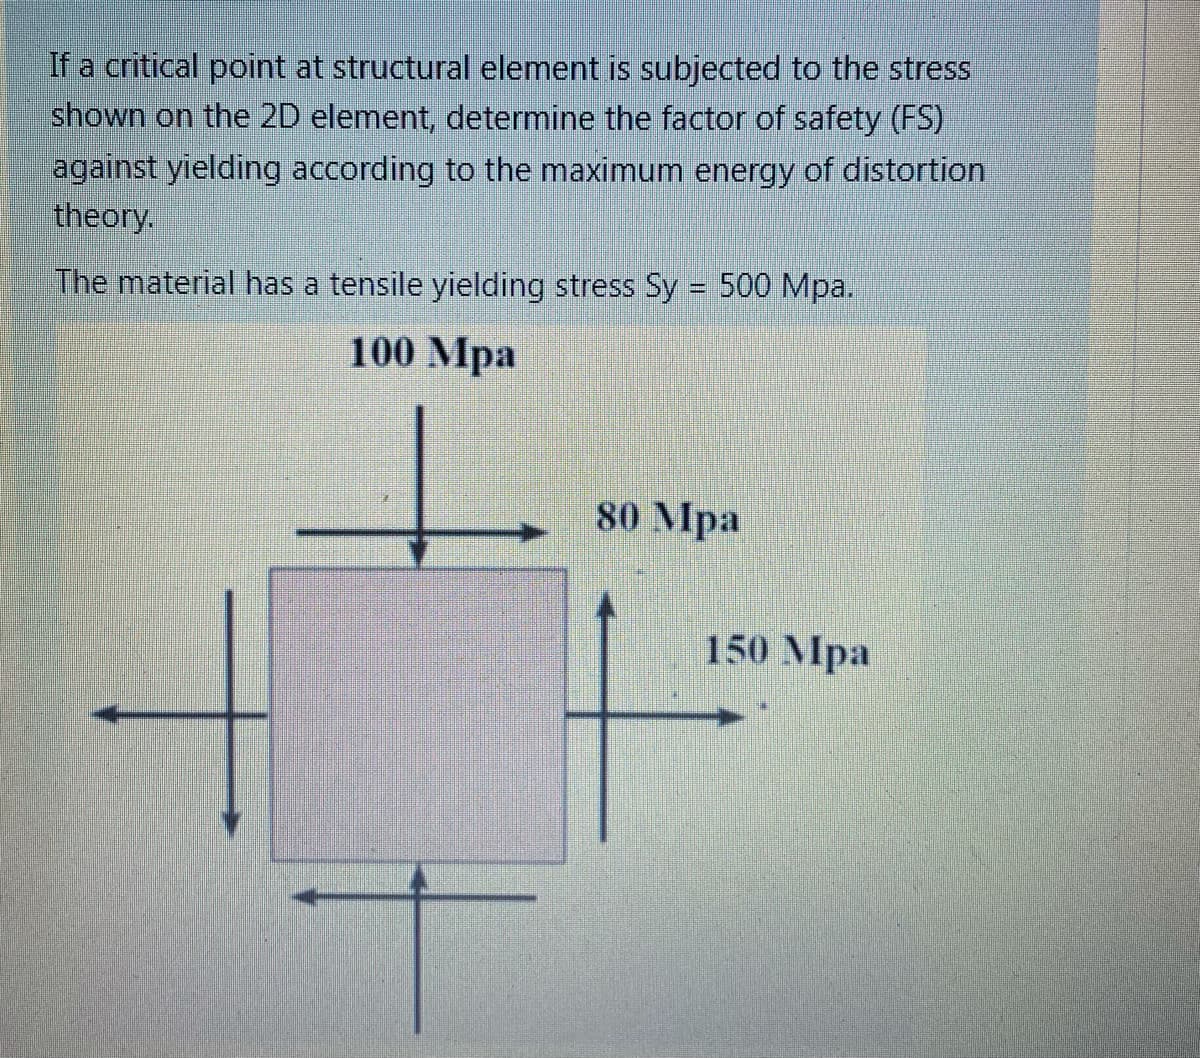 If a critical point at structural element is subjected to the stress
shown on the 2D element, determine the factor of safety (FS)
against yielding according to the maximum energy of distortion
theory.
The material has a tensile yielding stress Sy = 500 Mpa.
100 Mpa
80 Mpa
150 Mpa
